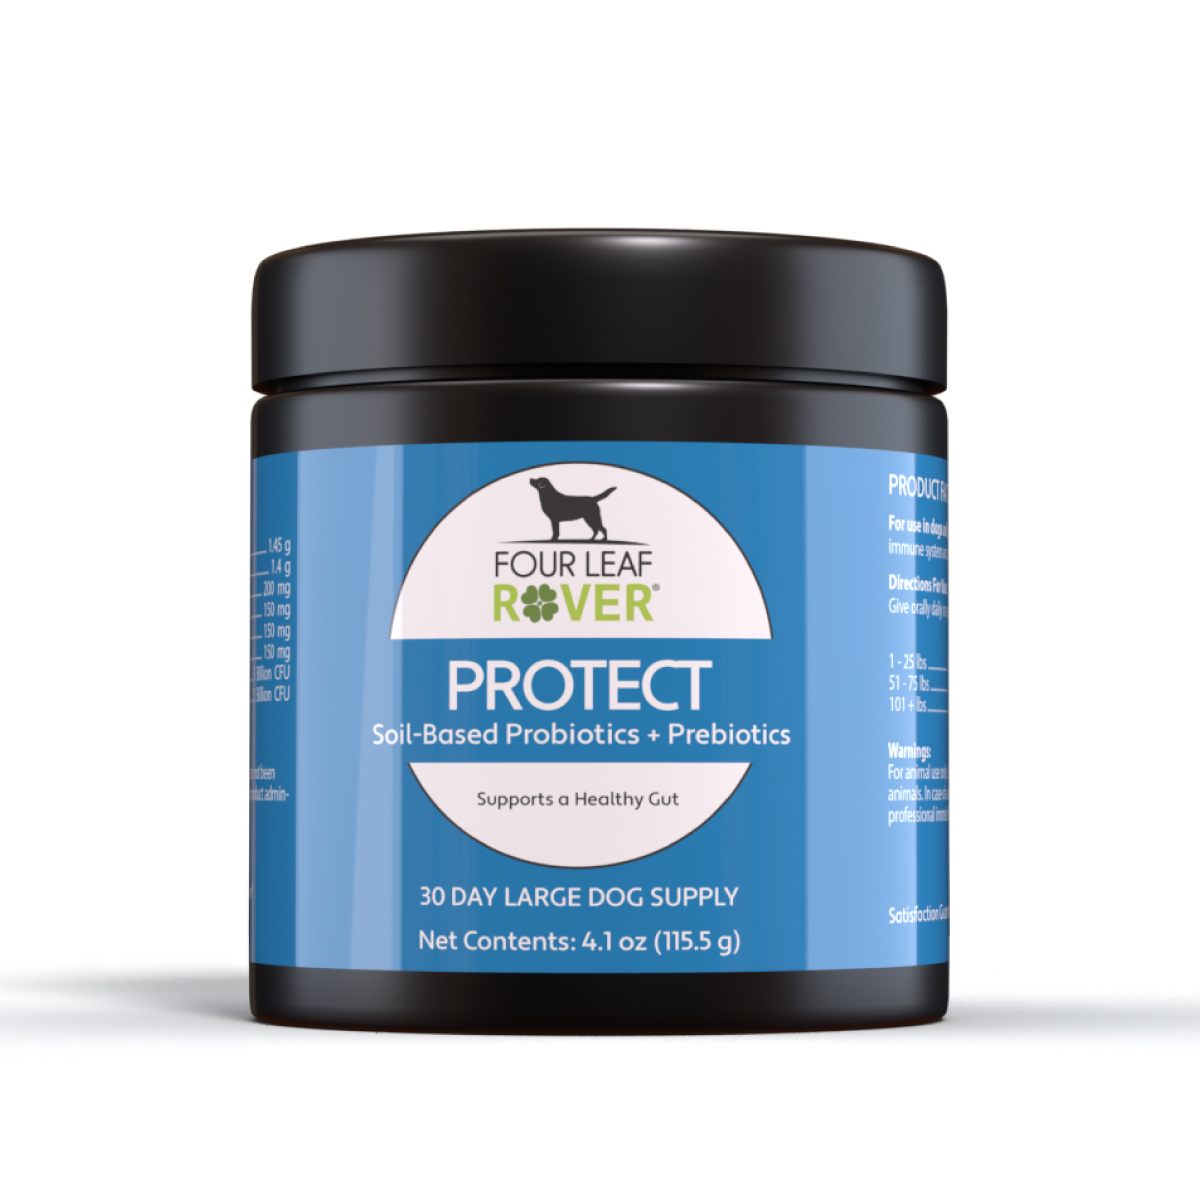 Protect soil based probiotic for dogs